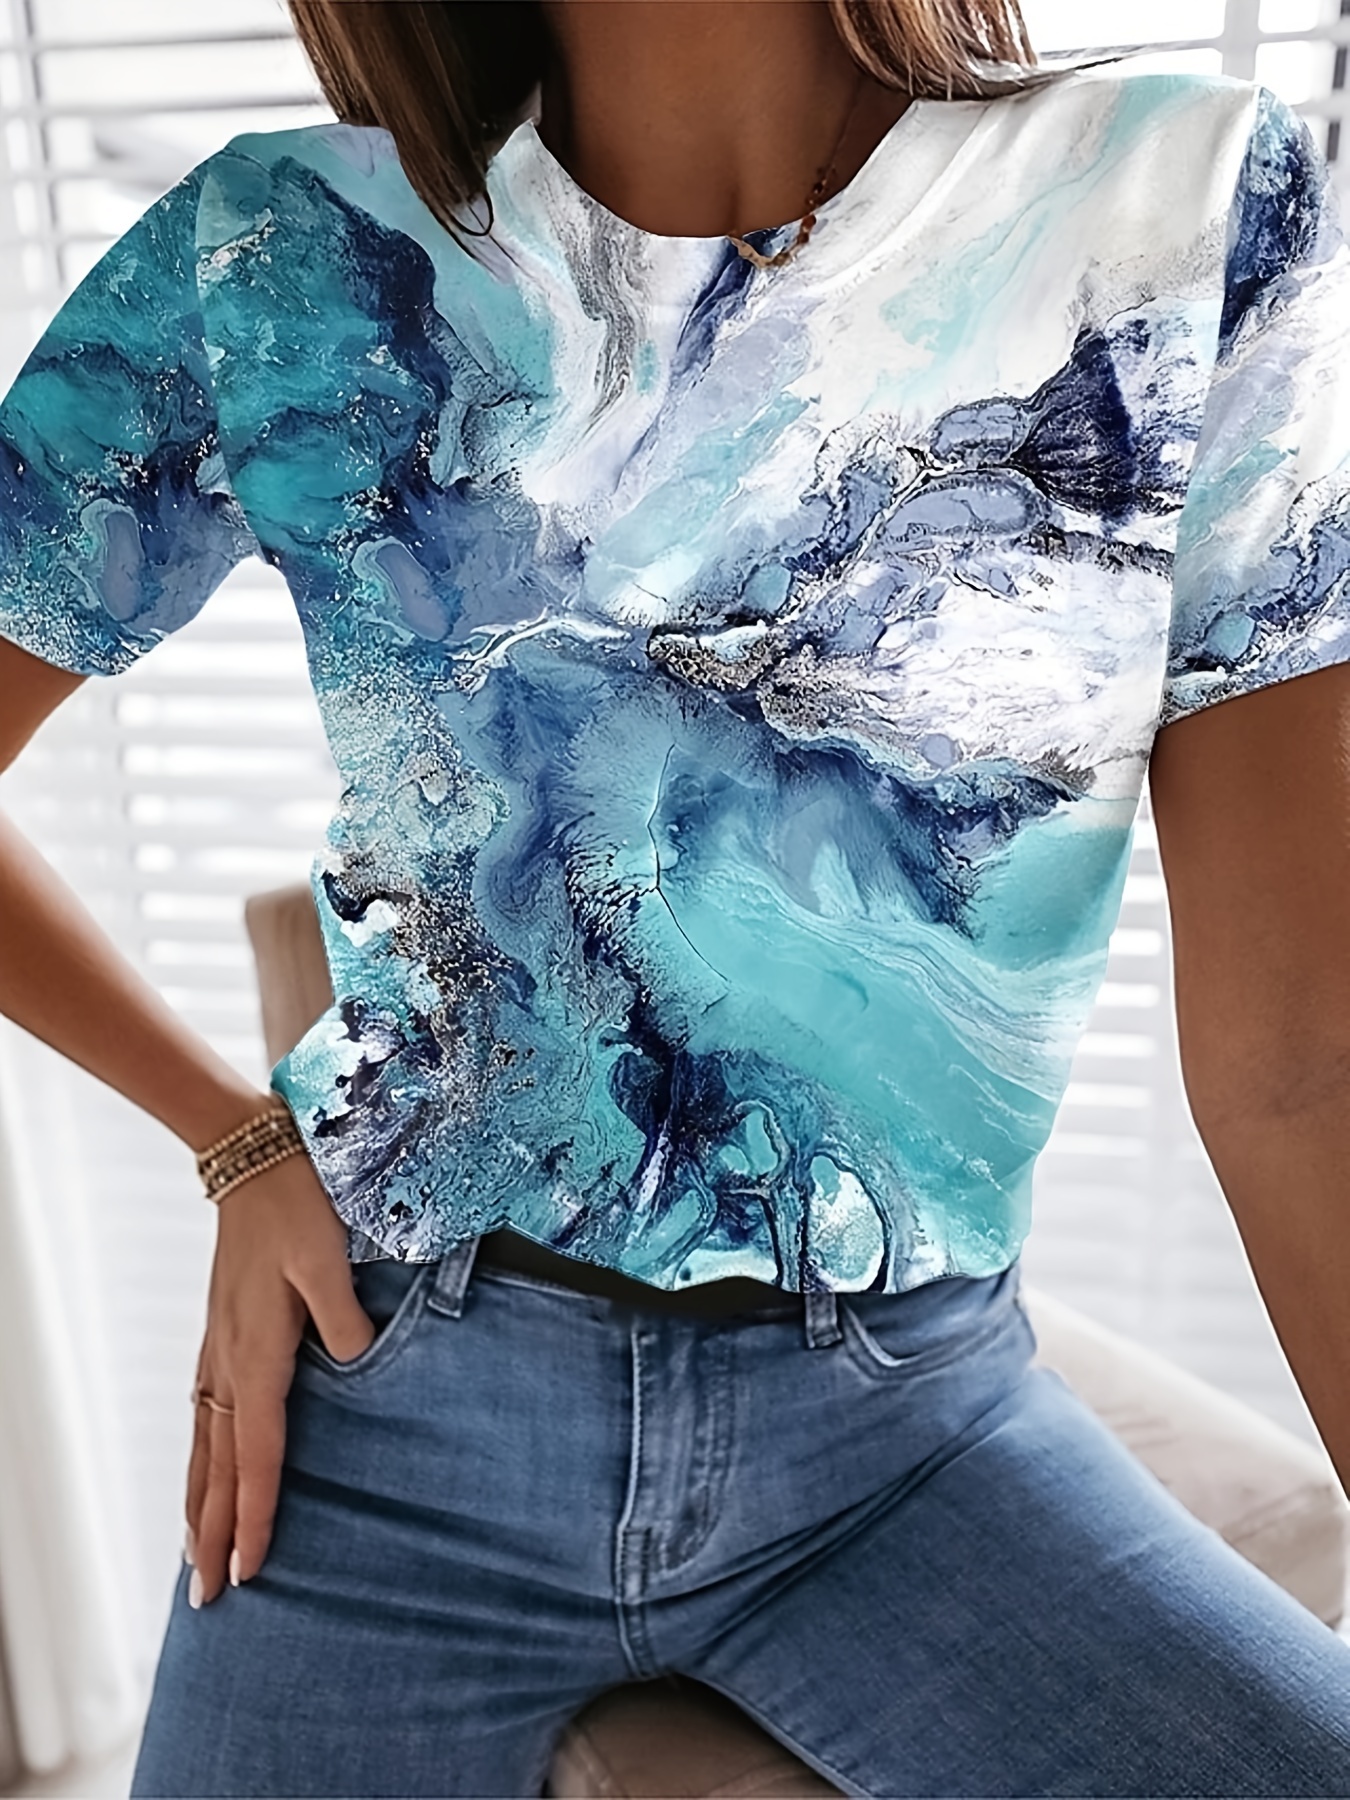 Best Deal for Summer T-Shirts for Women Casual Tee Shirts Floral Shirt